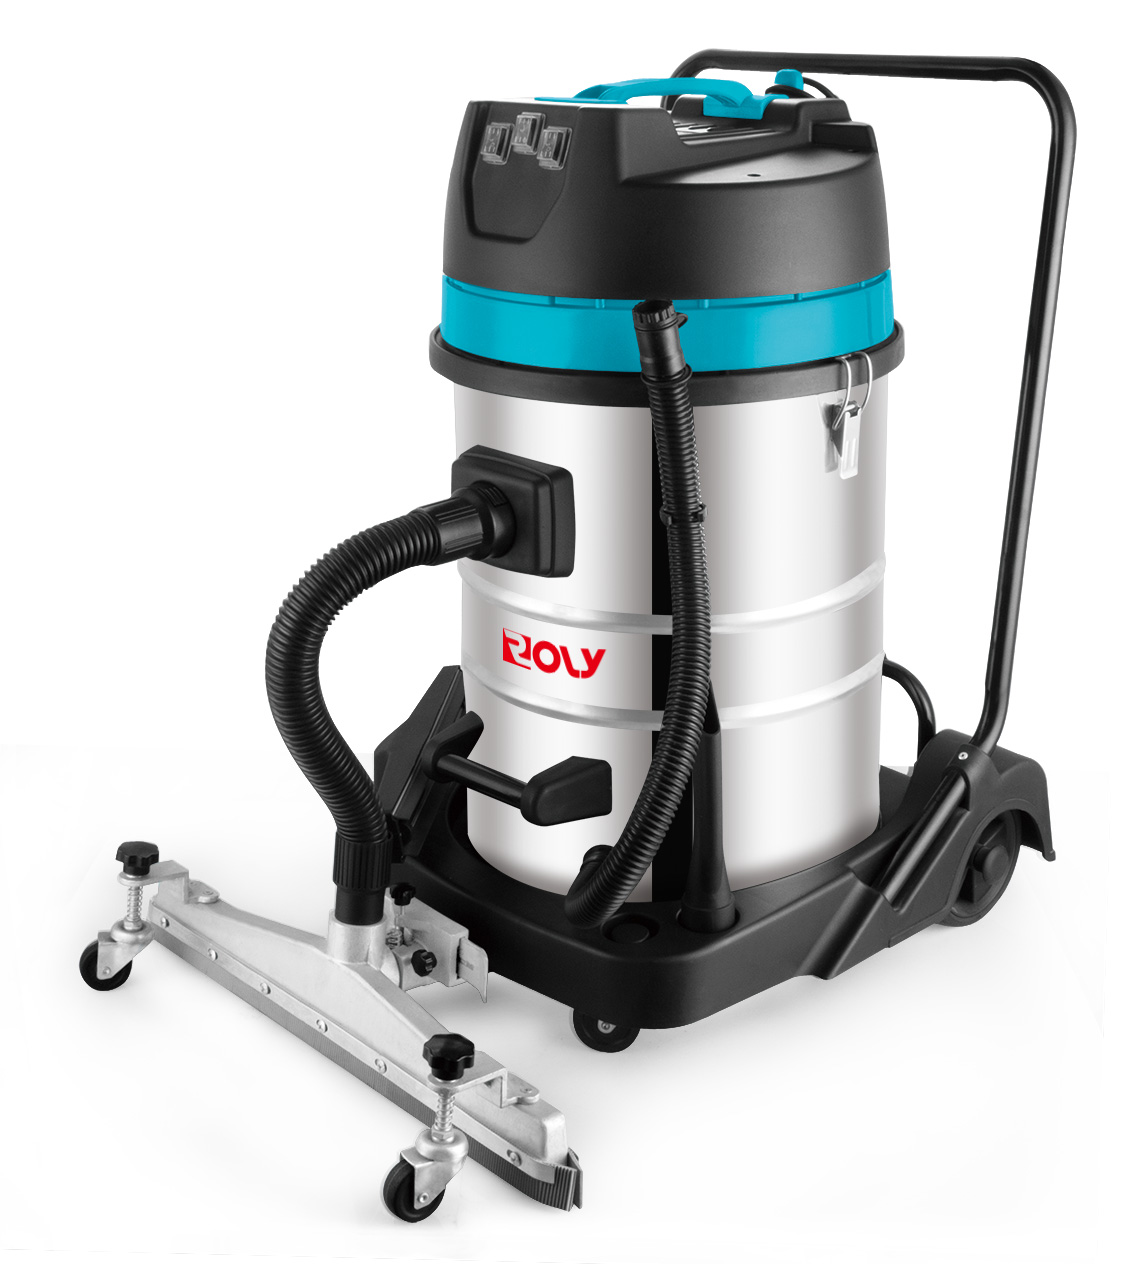 WL70 70L big industrial wet and dry with 2 motors vacuum cleaner